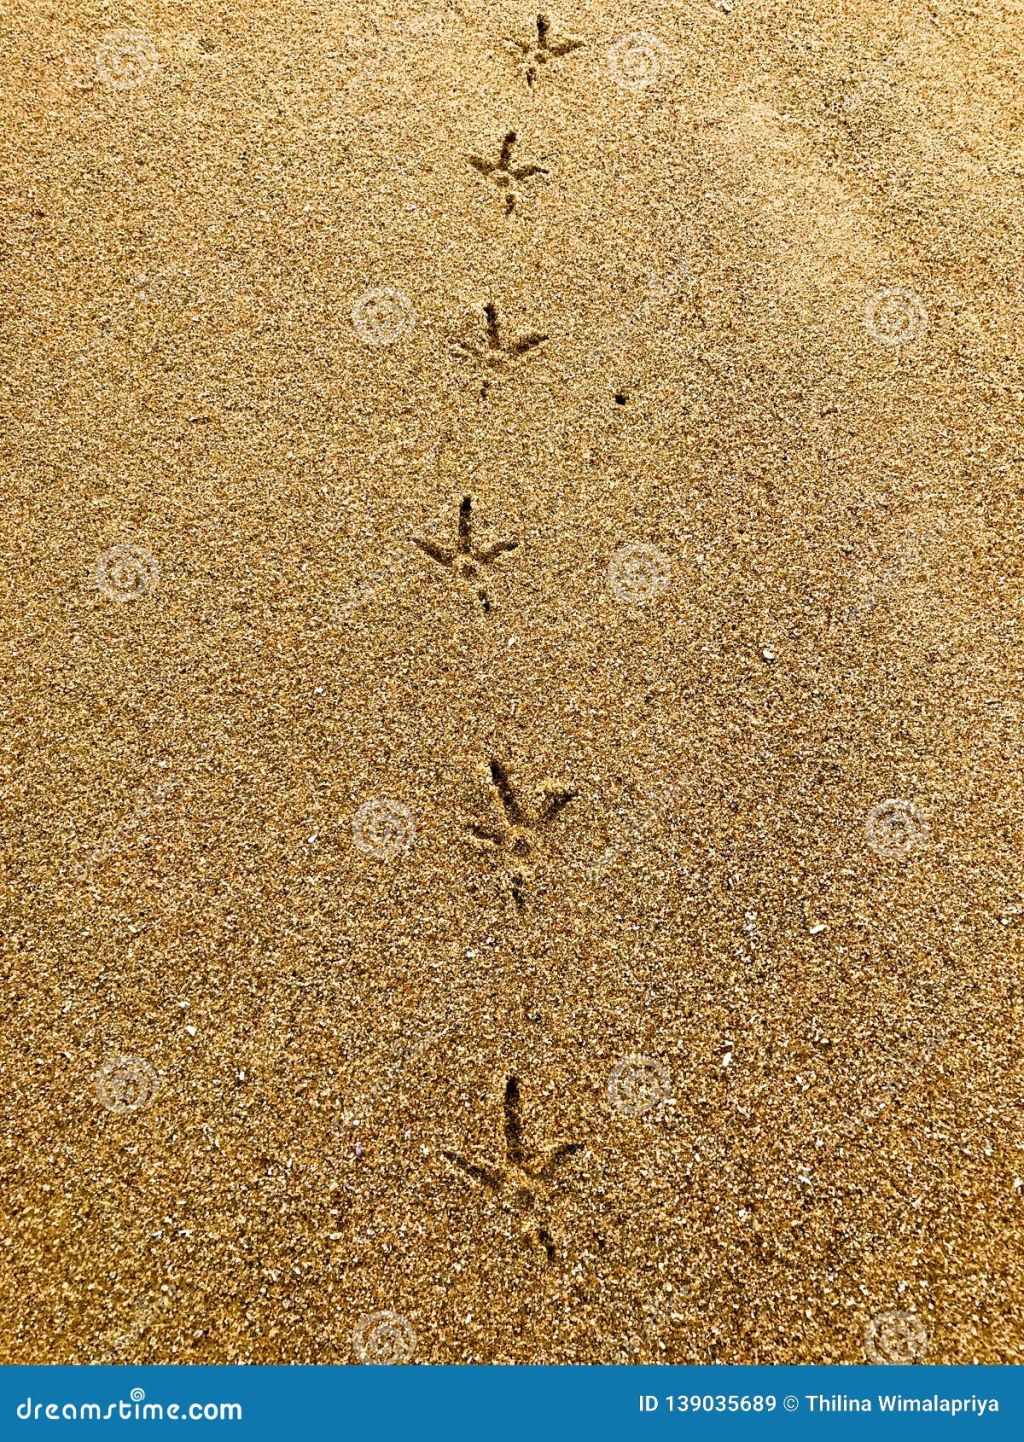 Picture of: Peacock Footprints Stock Photos – Free & Royalty-Free Stock Photos